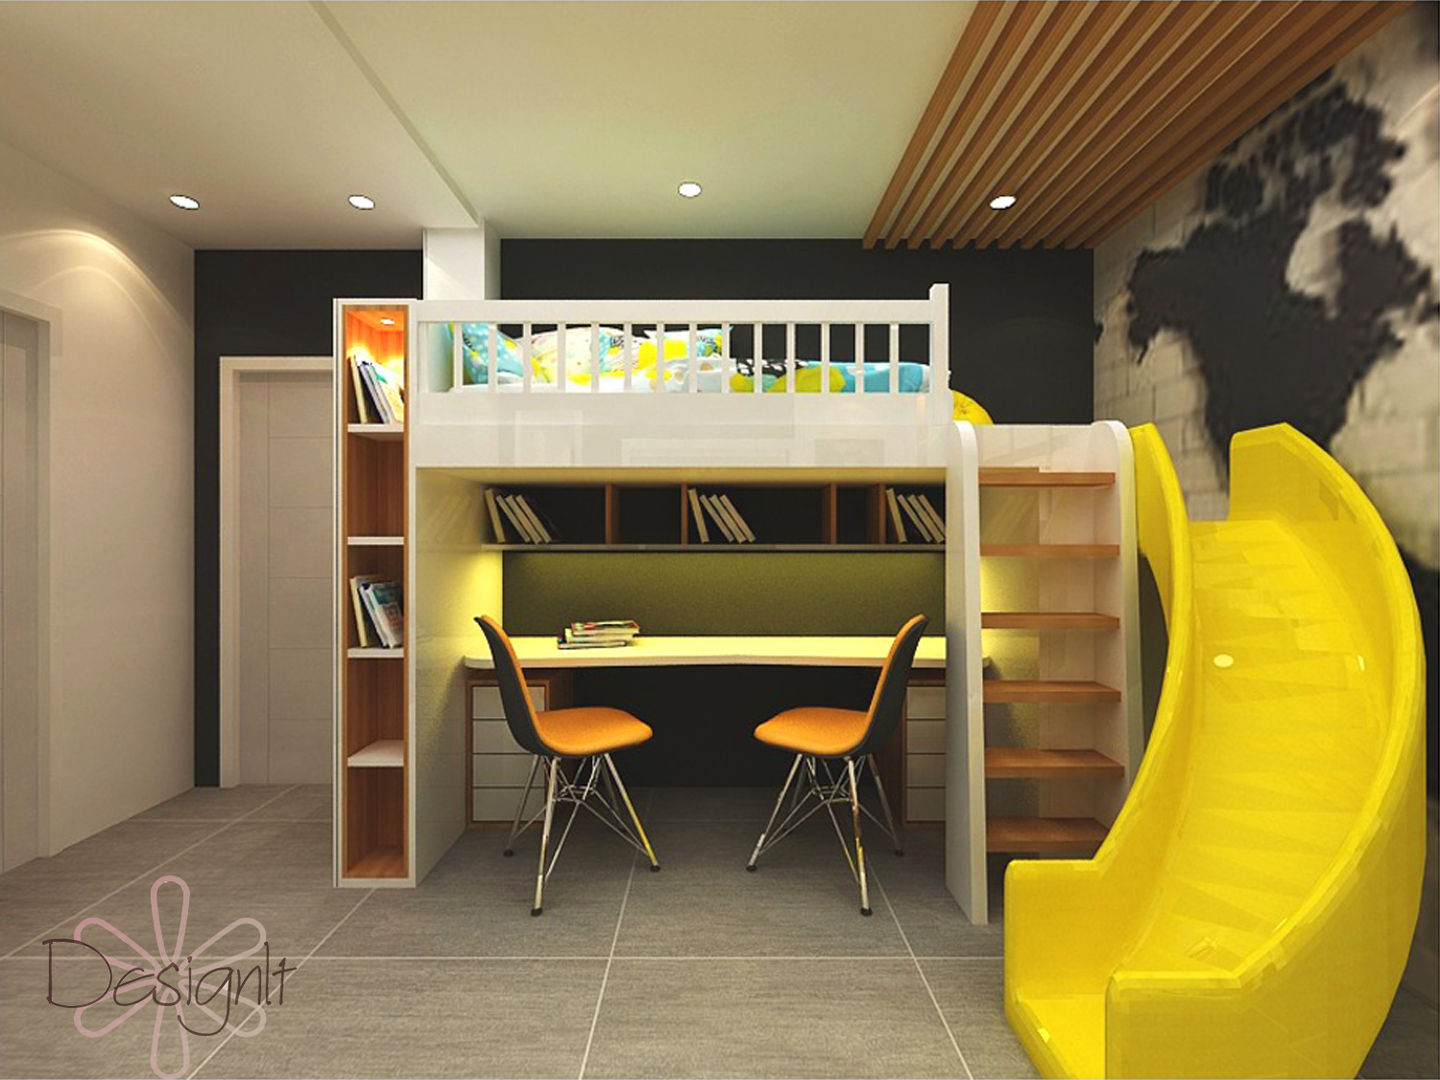 STUDY TABLE WITH BUNK BED DESIGNIT 小臥室 合板